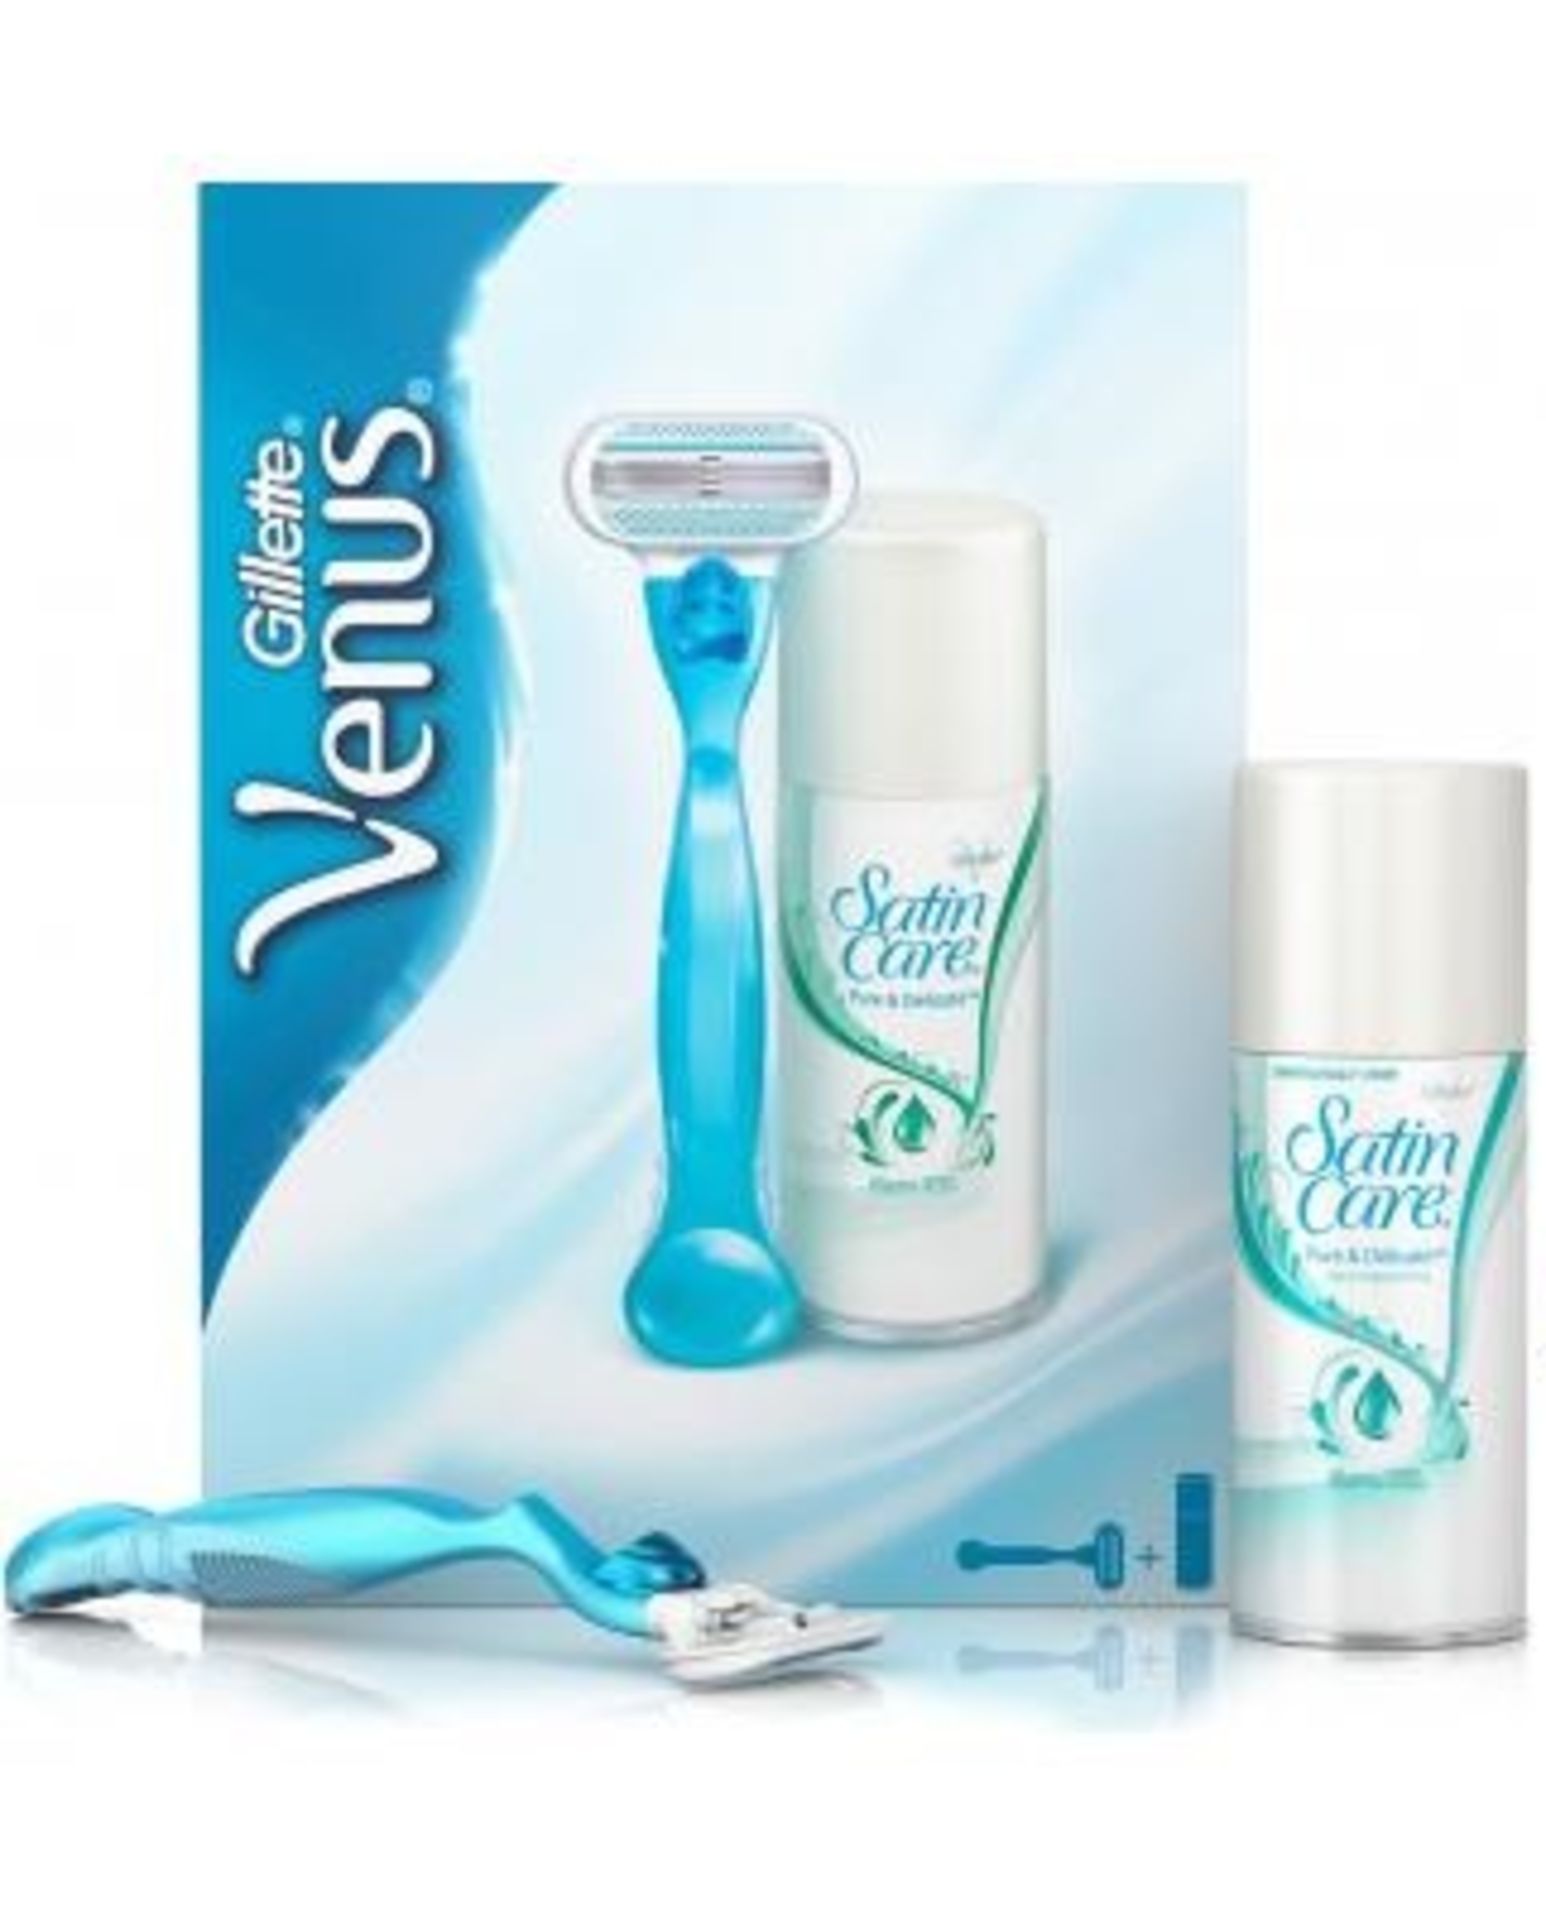 V Brand New Gillette Venus Satin Care Pure & Delicate Set With Razor And Shave Gel - Image 2 of 2